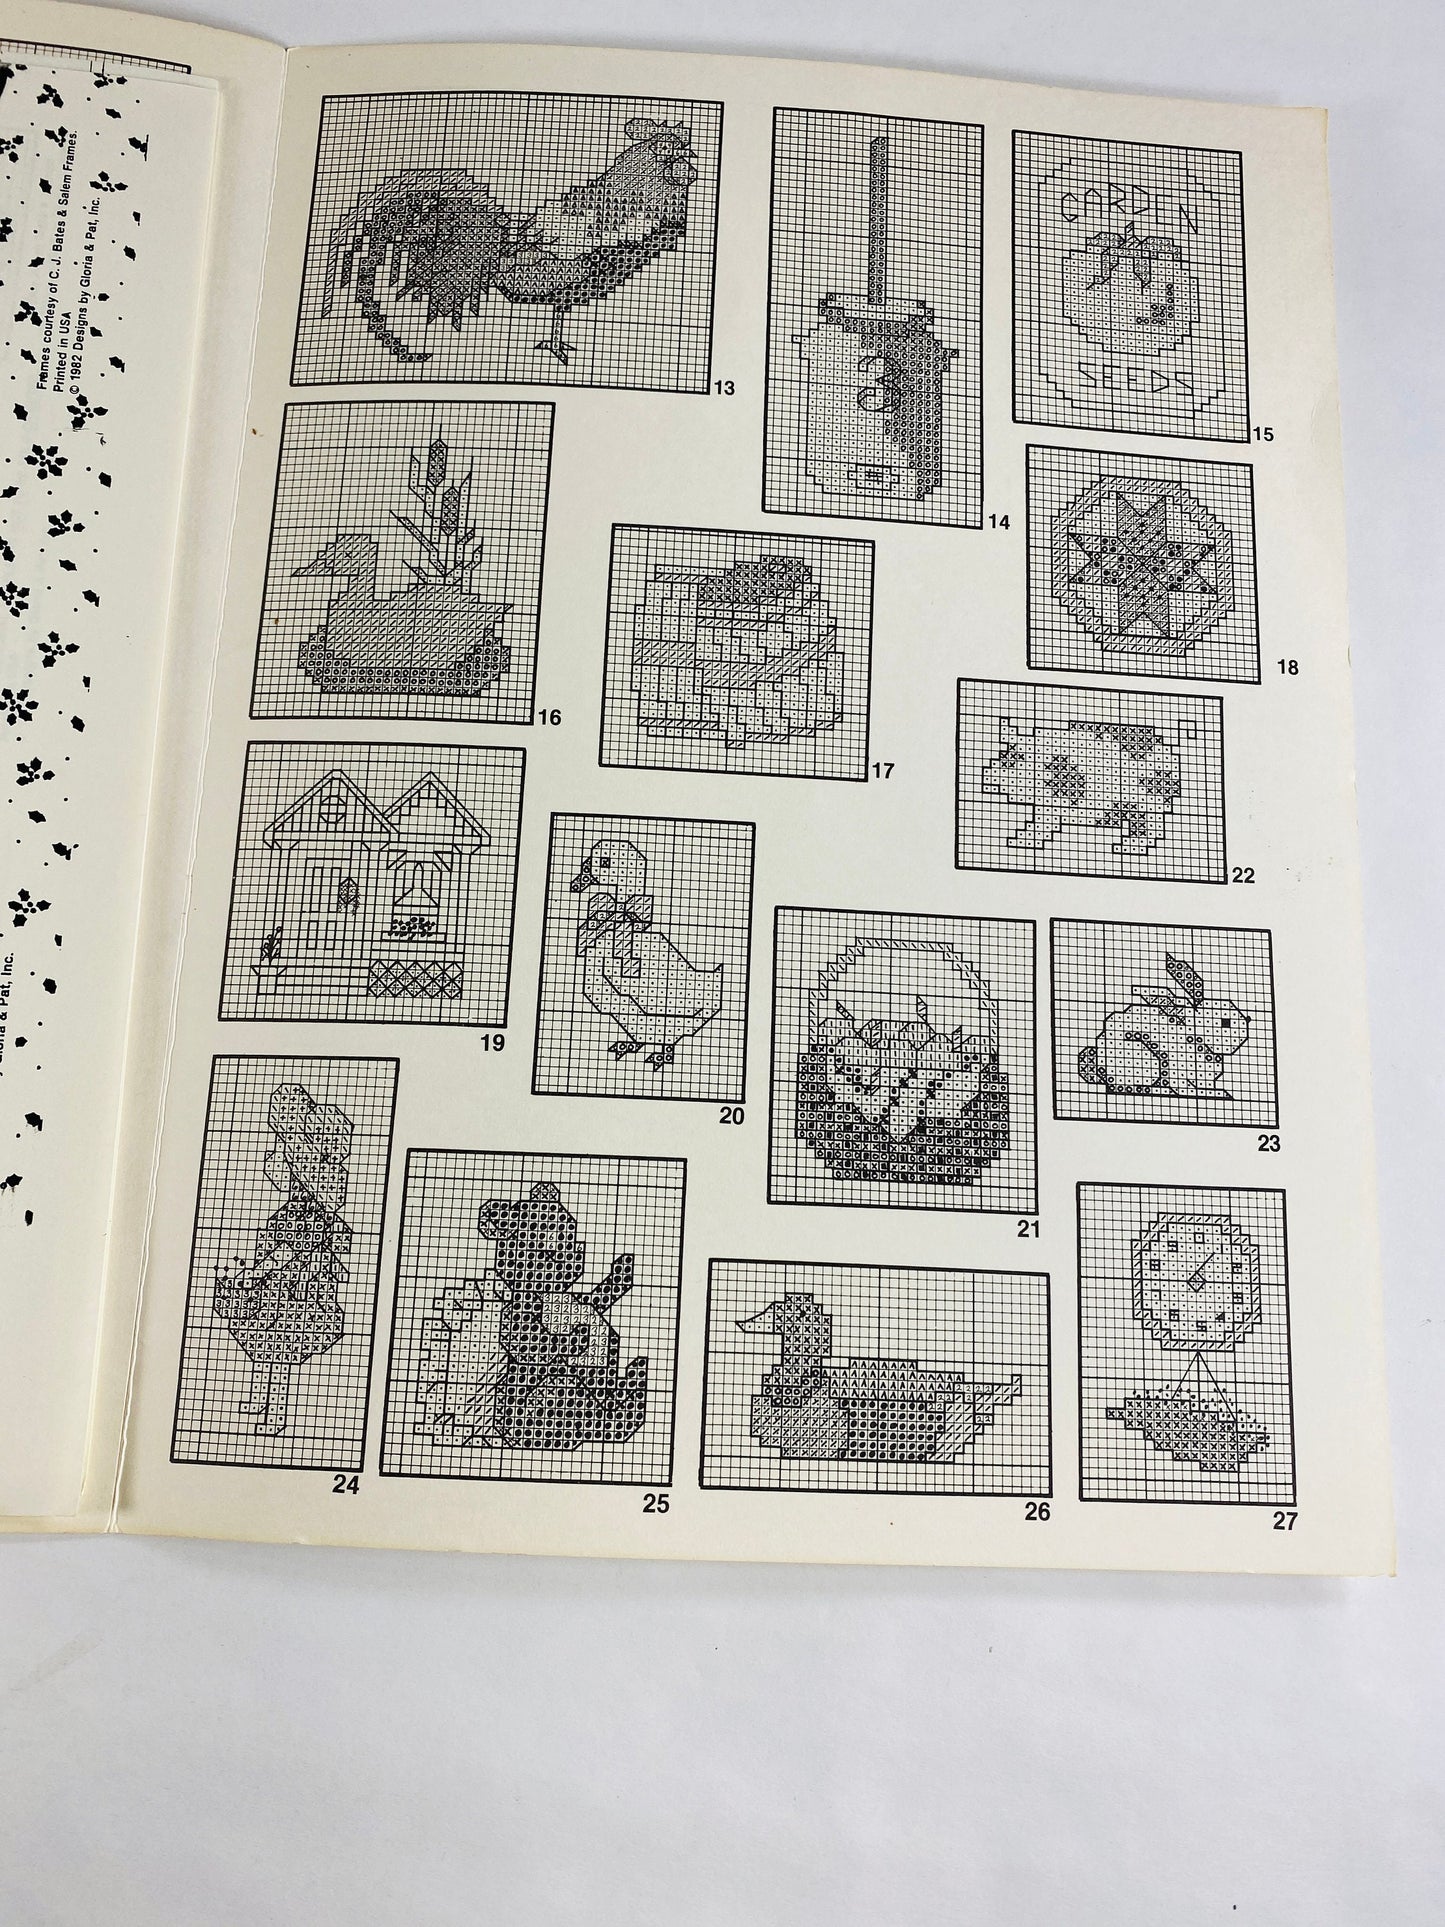 Vintage lot of needlepoint stitches motifs and patterns from the 1970s-1980s embroidery instructions cross stitch mini